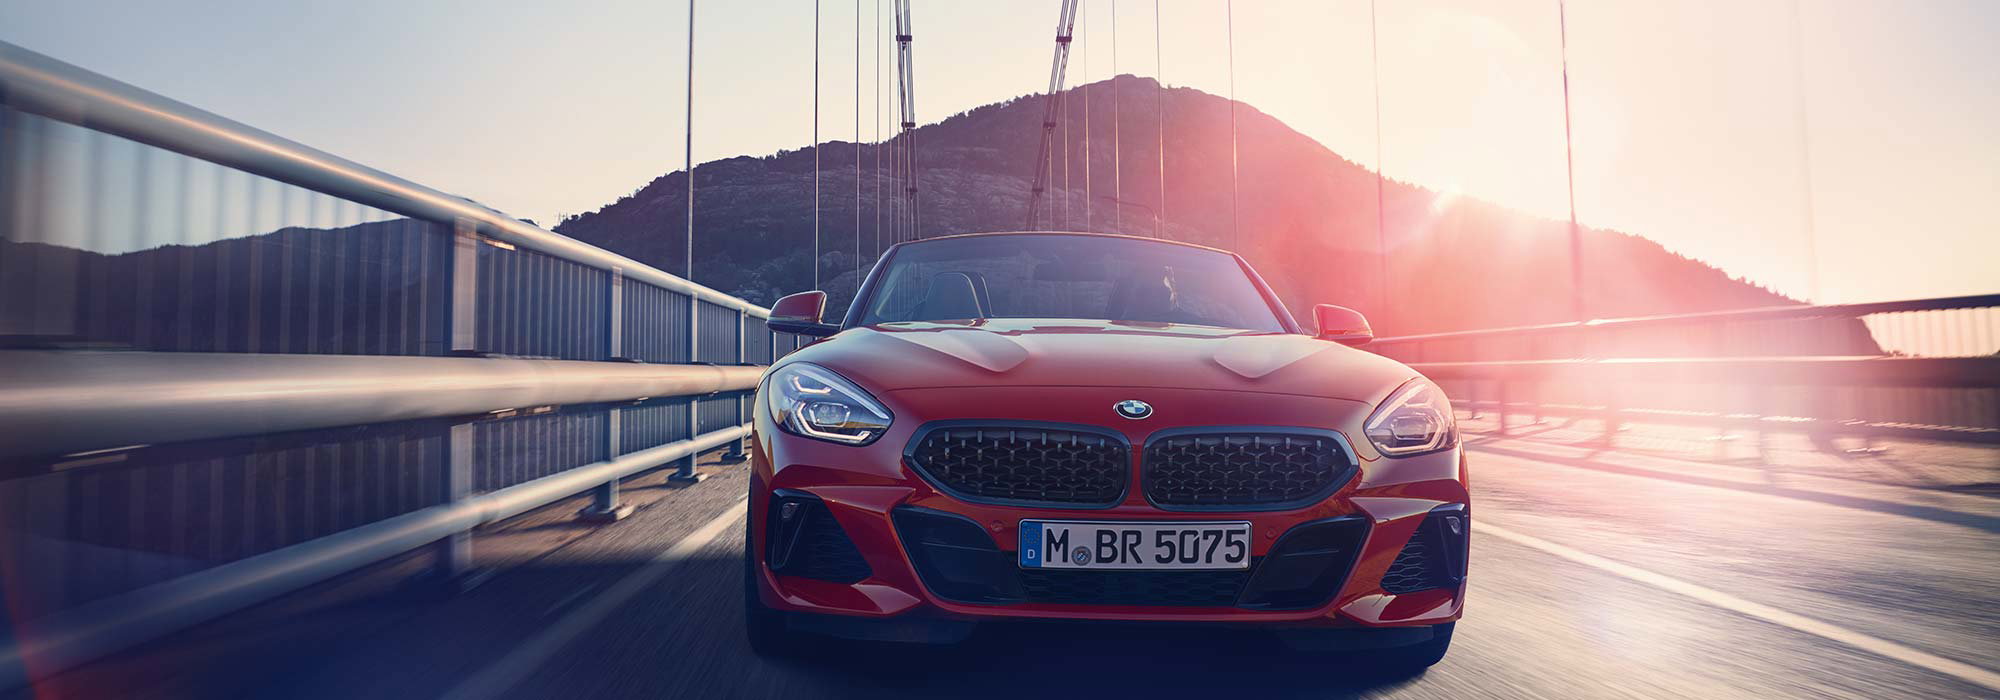 BMW's Z4 convertible has little competition, offers freedom on tap